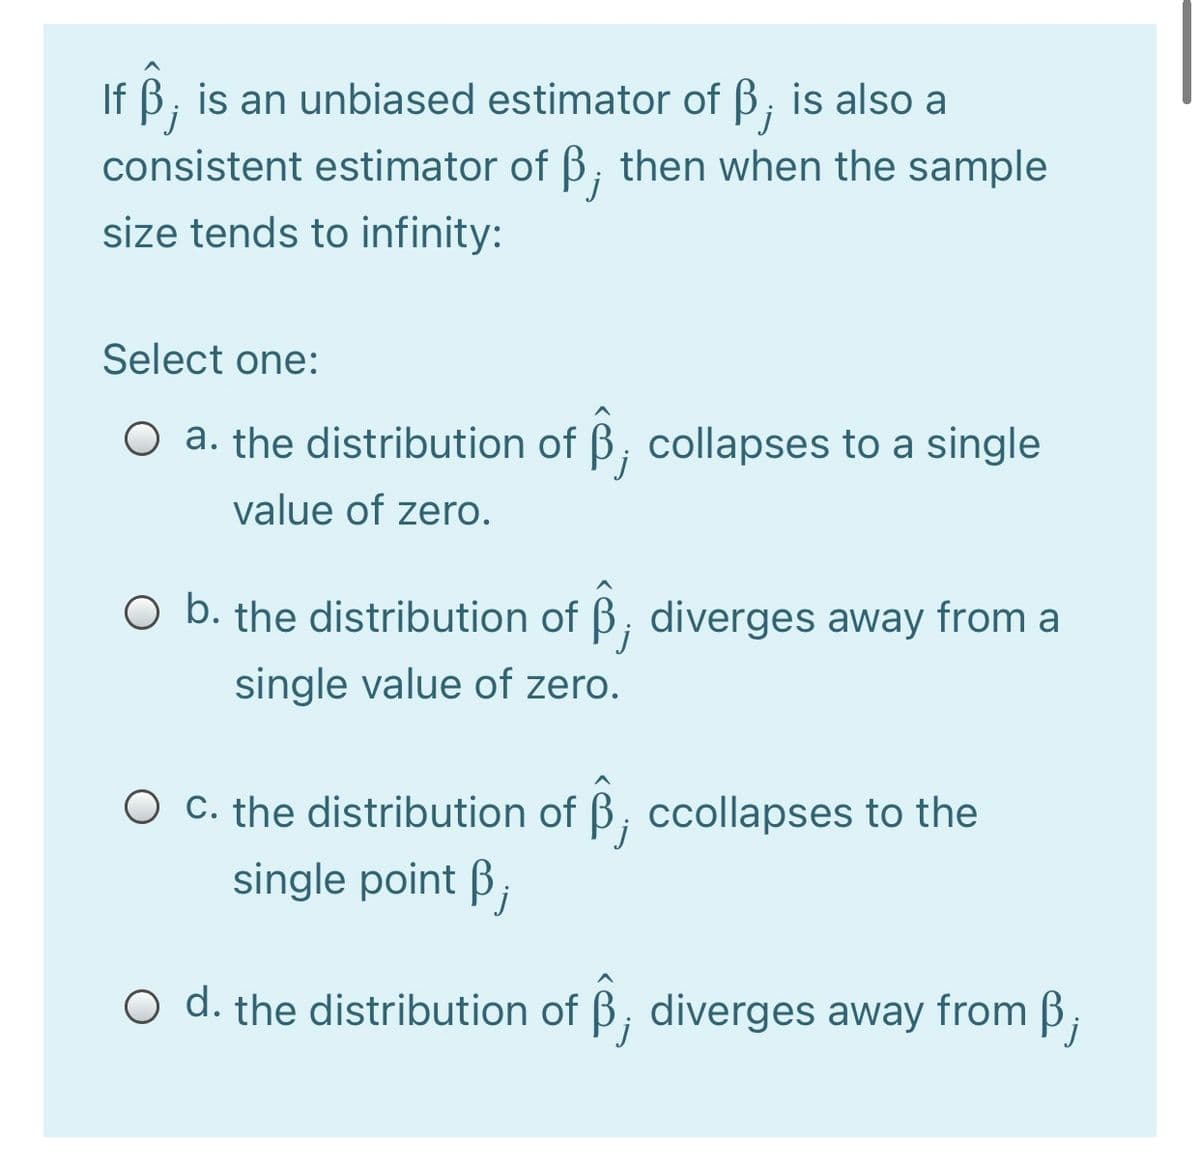 If B, is an unbiased estimator of B; is also a
j
consistent estimator of B, then when the sample
size tends to infinity:
Select one:
O a. the distribution of B, collapses to a single
value of zero.
O b. the distribution of ß, diverges away from a
single value of zero.
O c. the distribution of B, ccollapses to the
single point ß;
O d. the distribution of B, diverges away from B;
